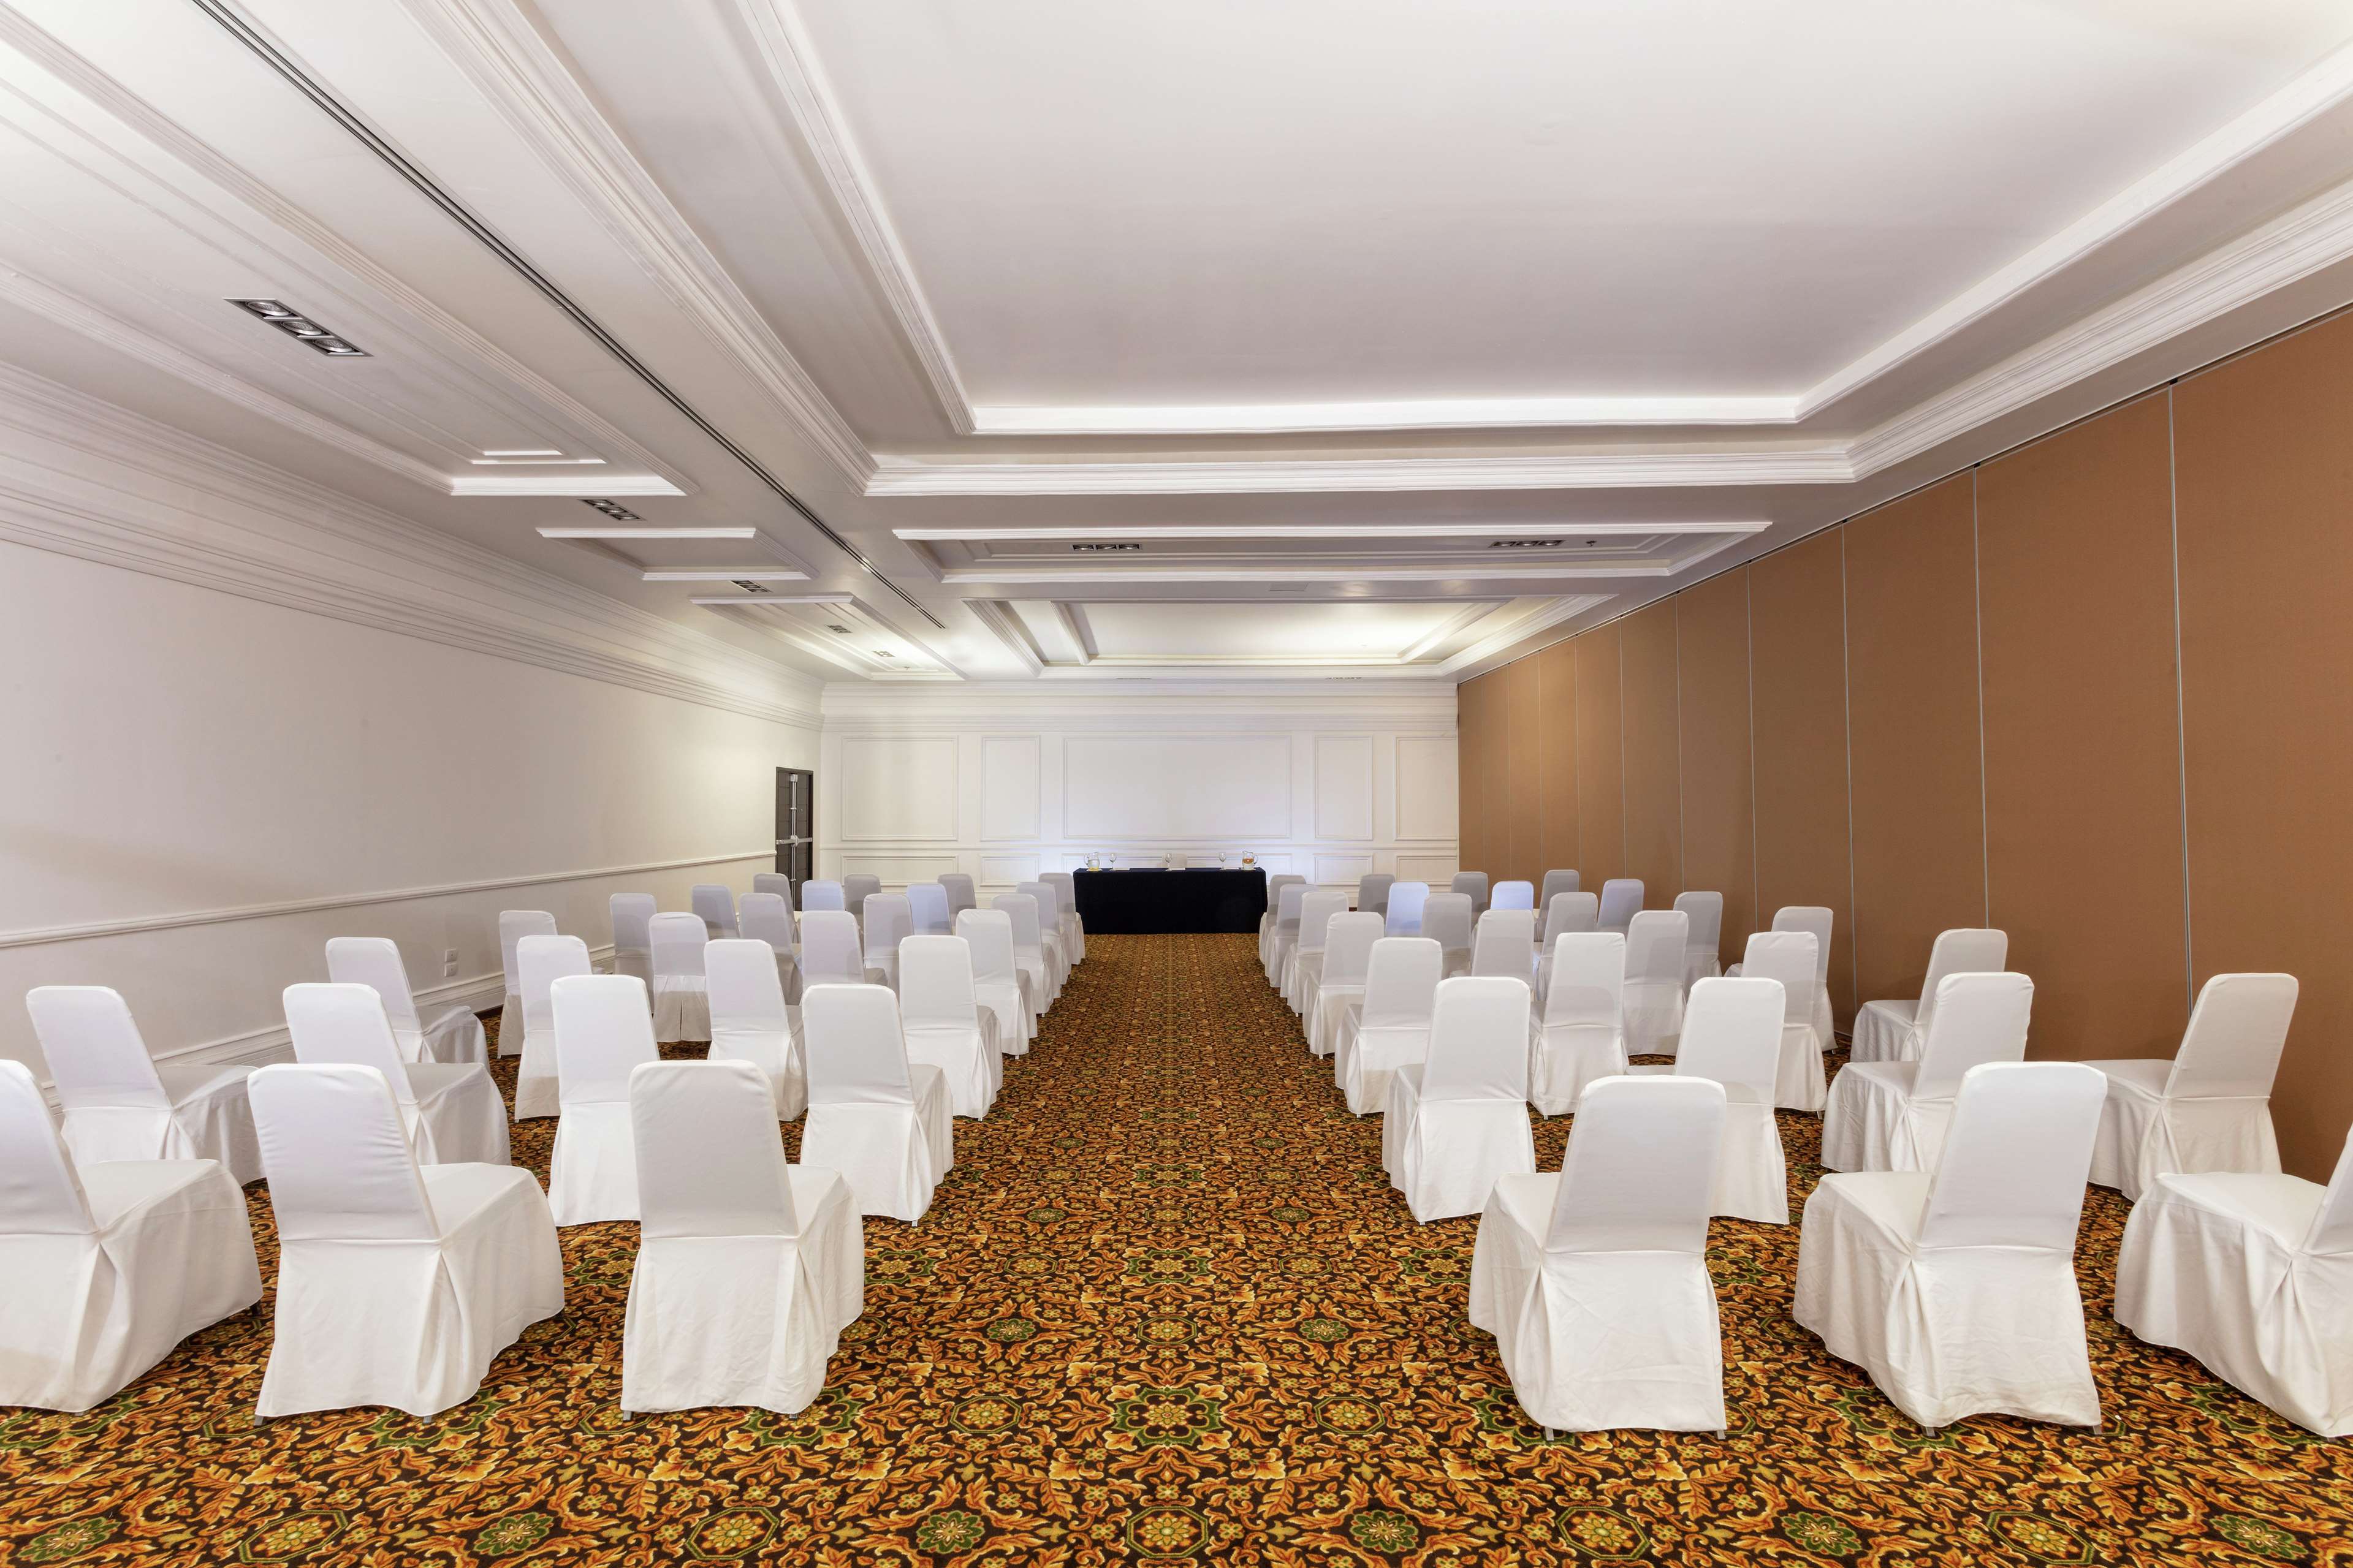 Images DoubleTree by Hilton Toluca